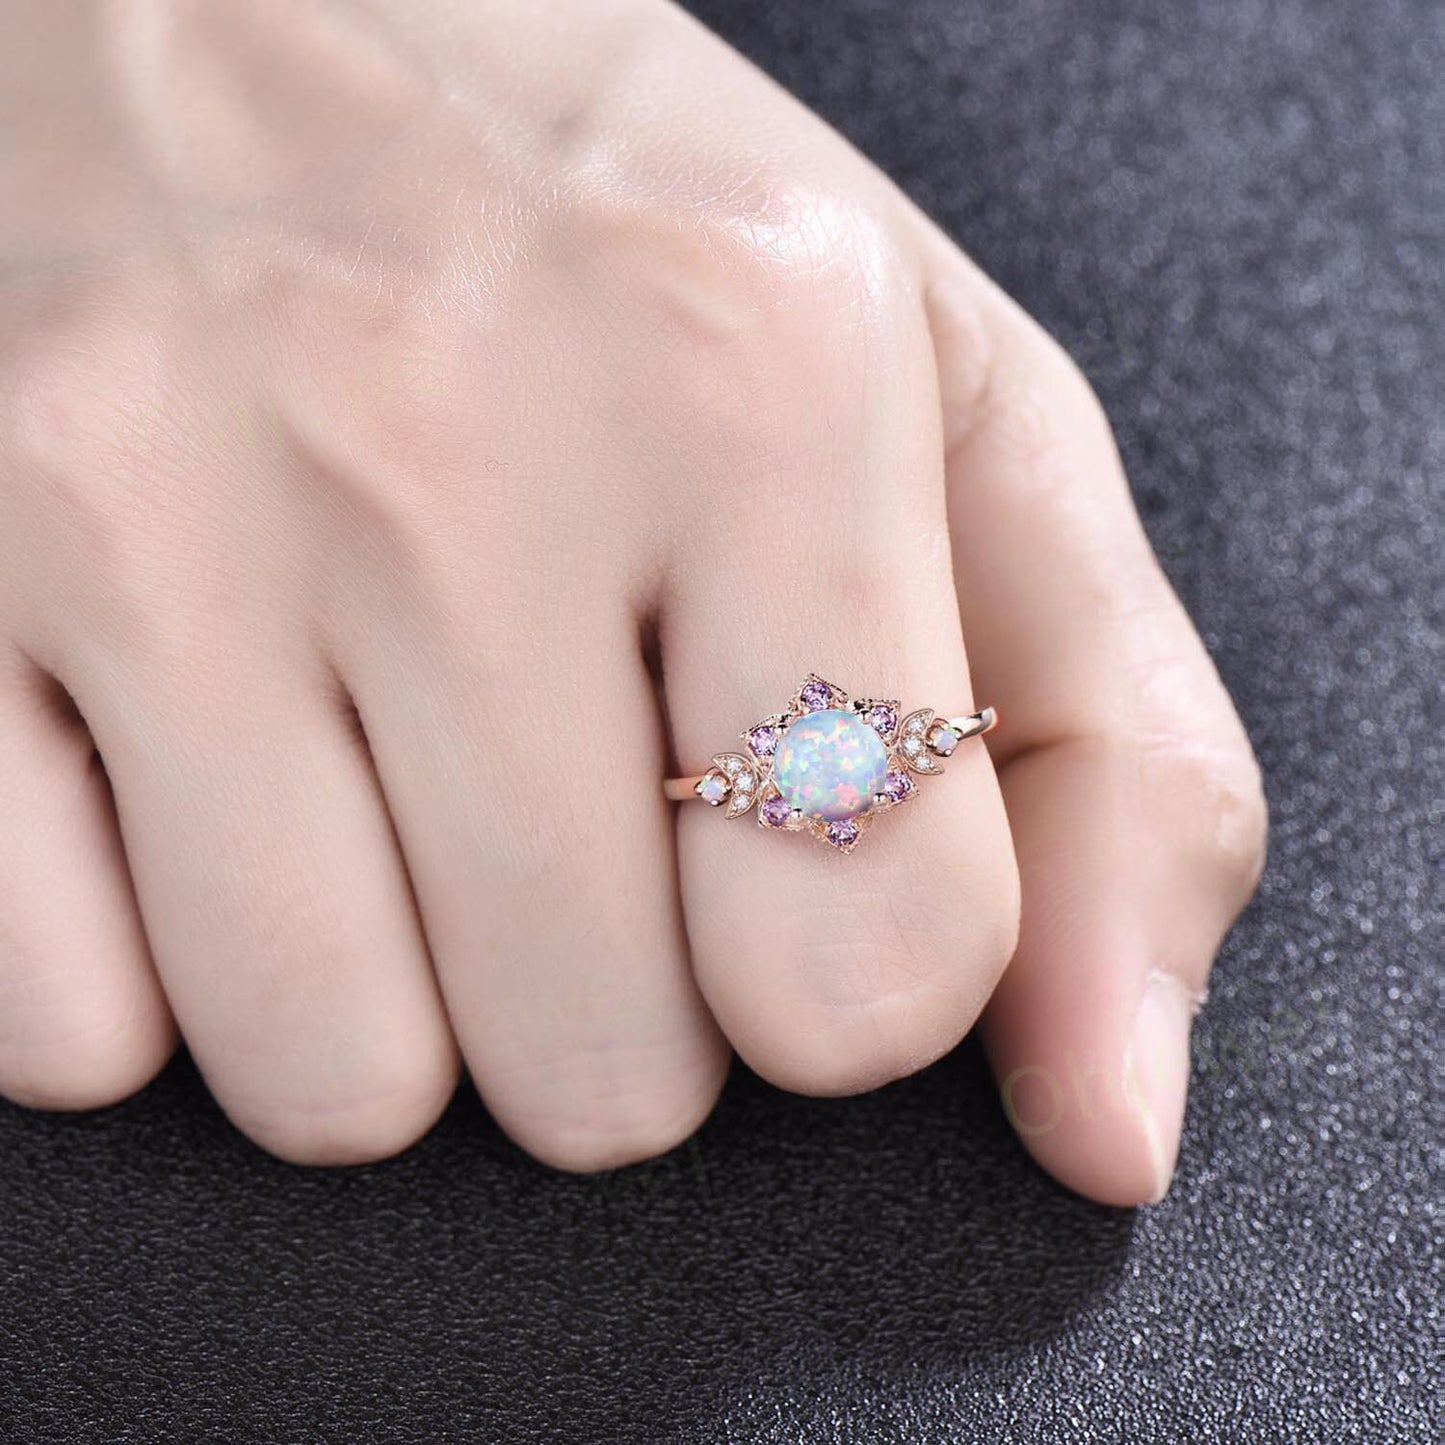 Vintage round white opal engagement ring rose gold milgrain floral moon amethyst diamond ring women unique wedding anniversary ring gift